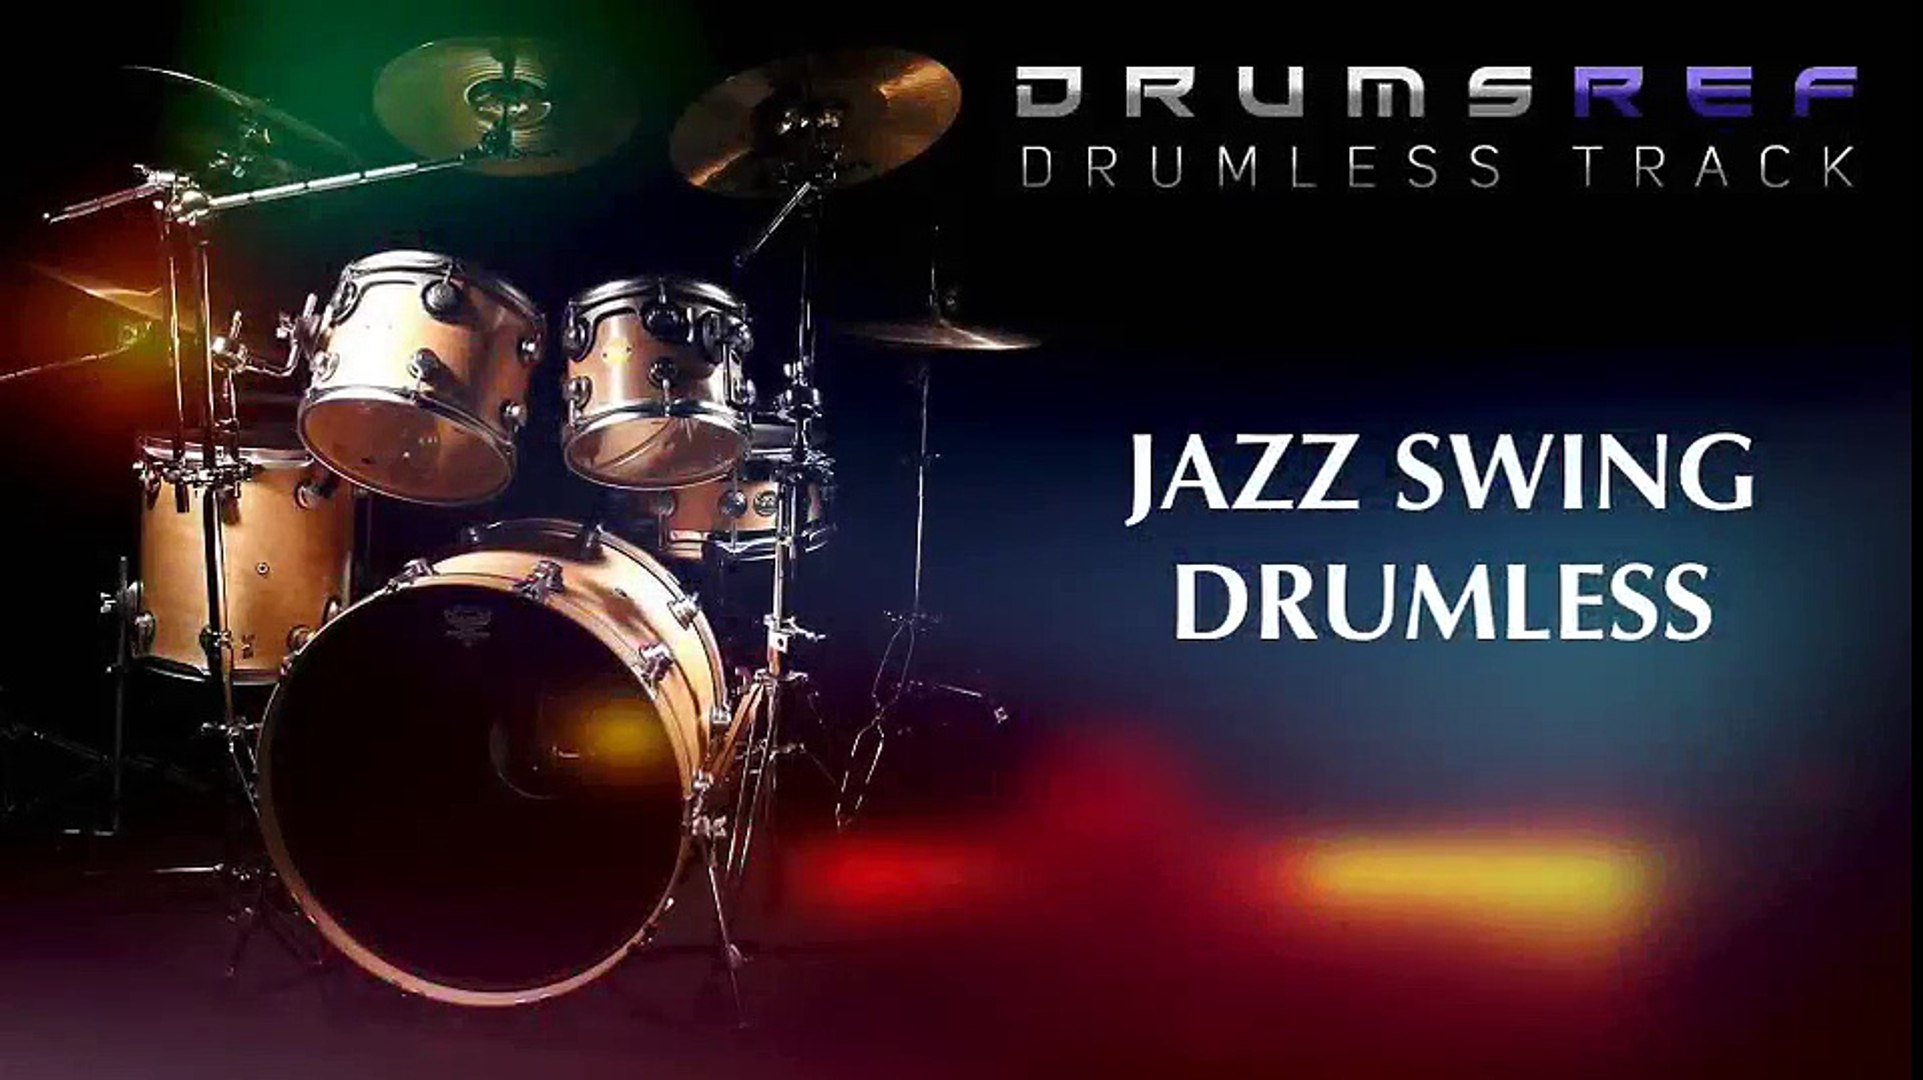 Instrumental Jazz Swing Drumless Track with Open Drum Solo Bar #2 ...